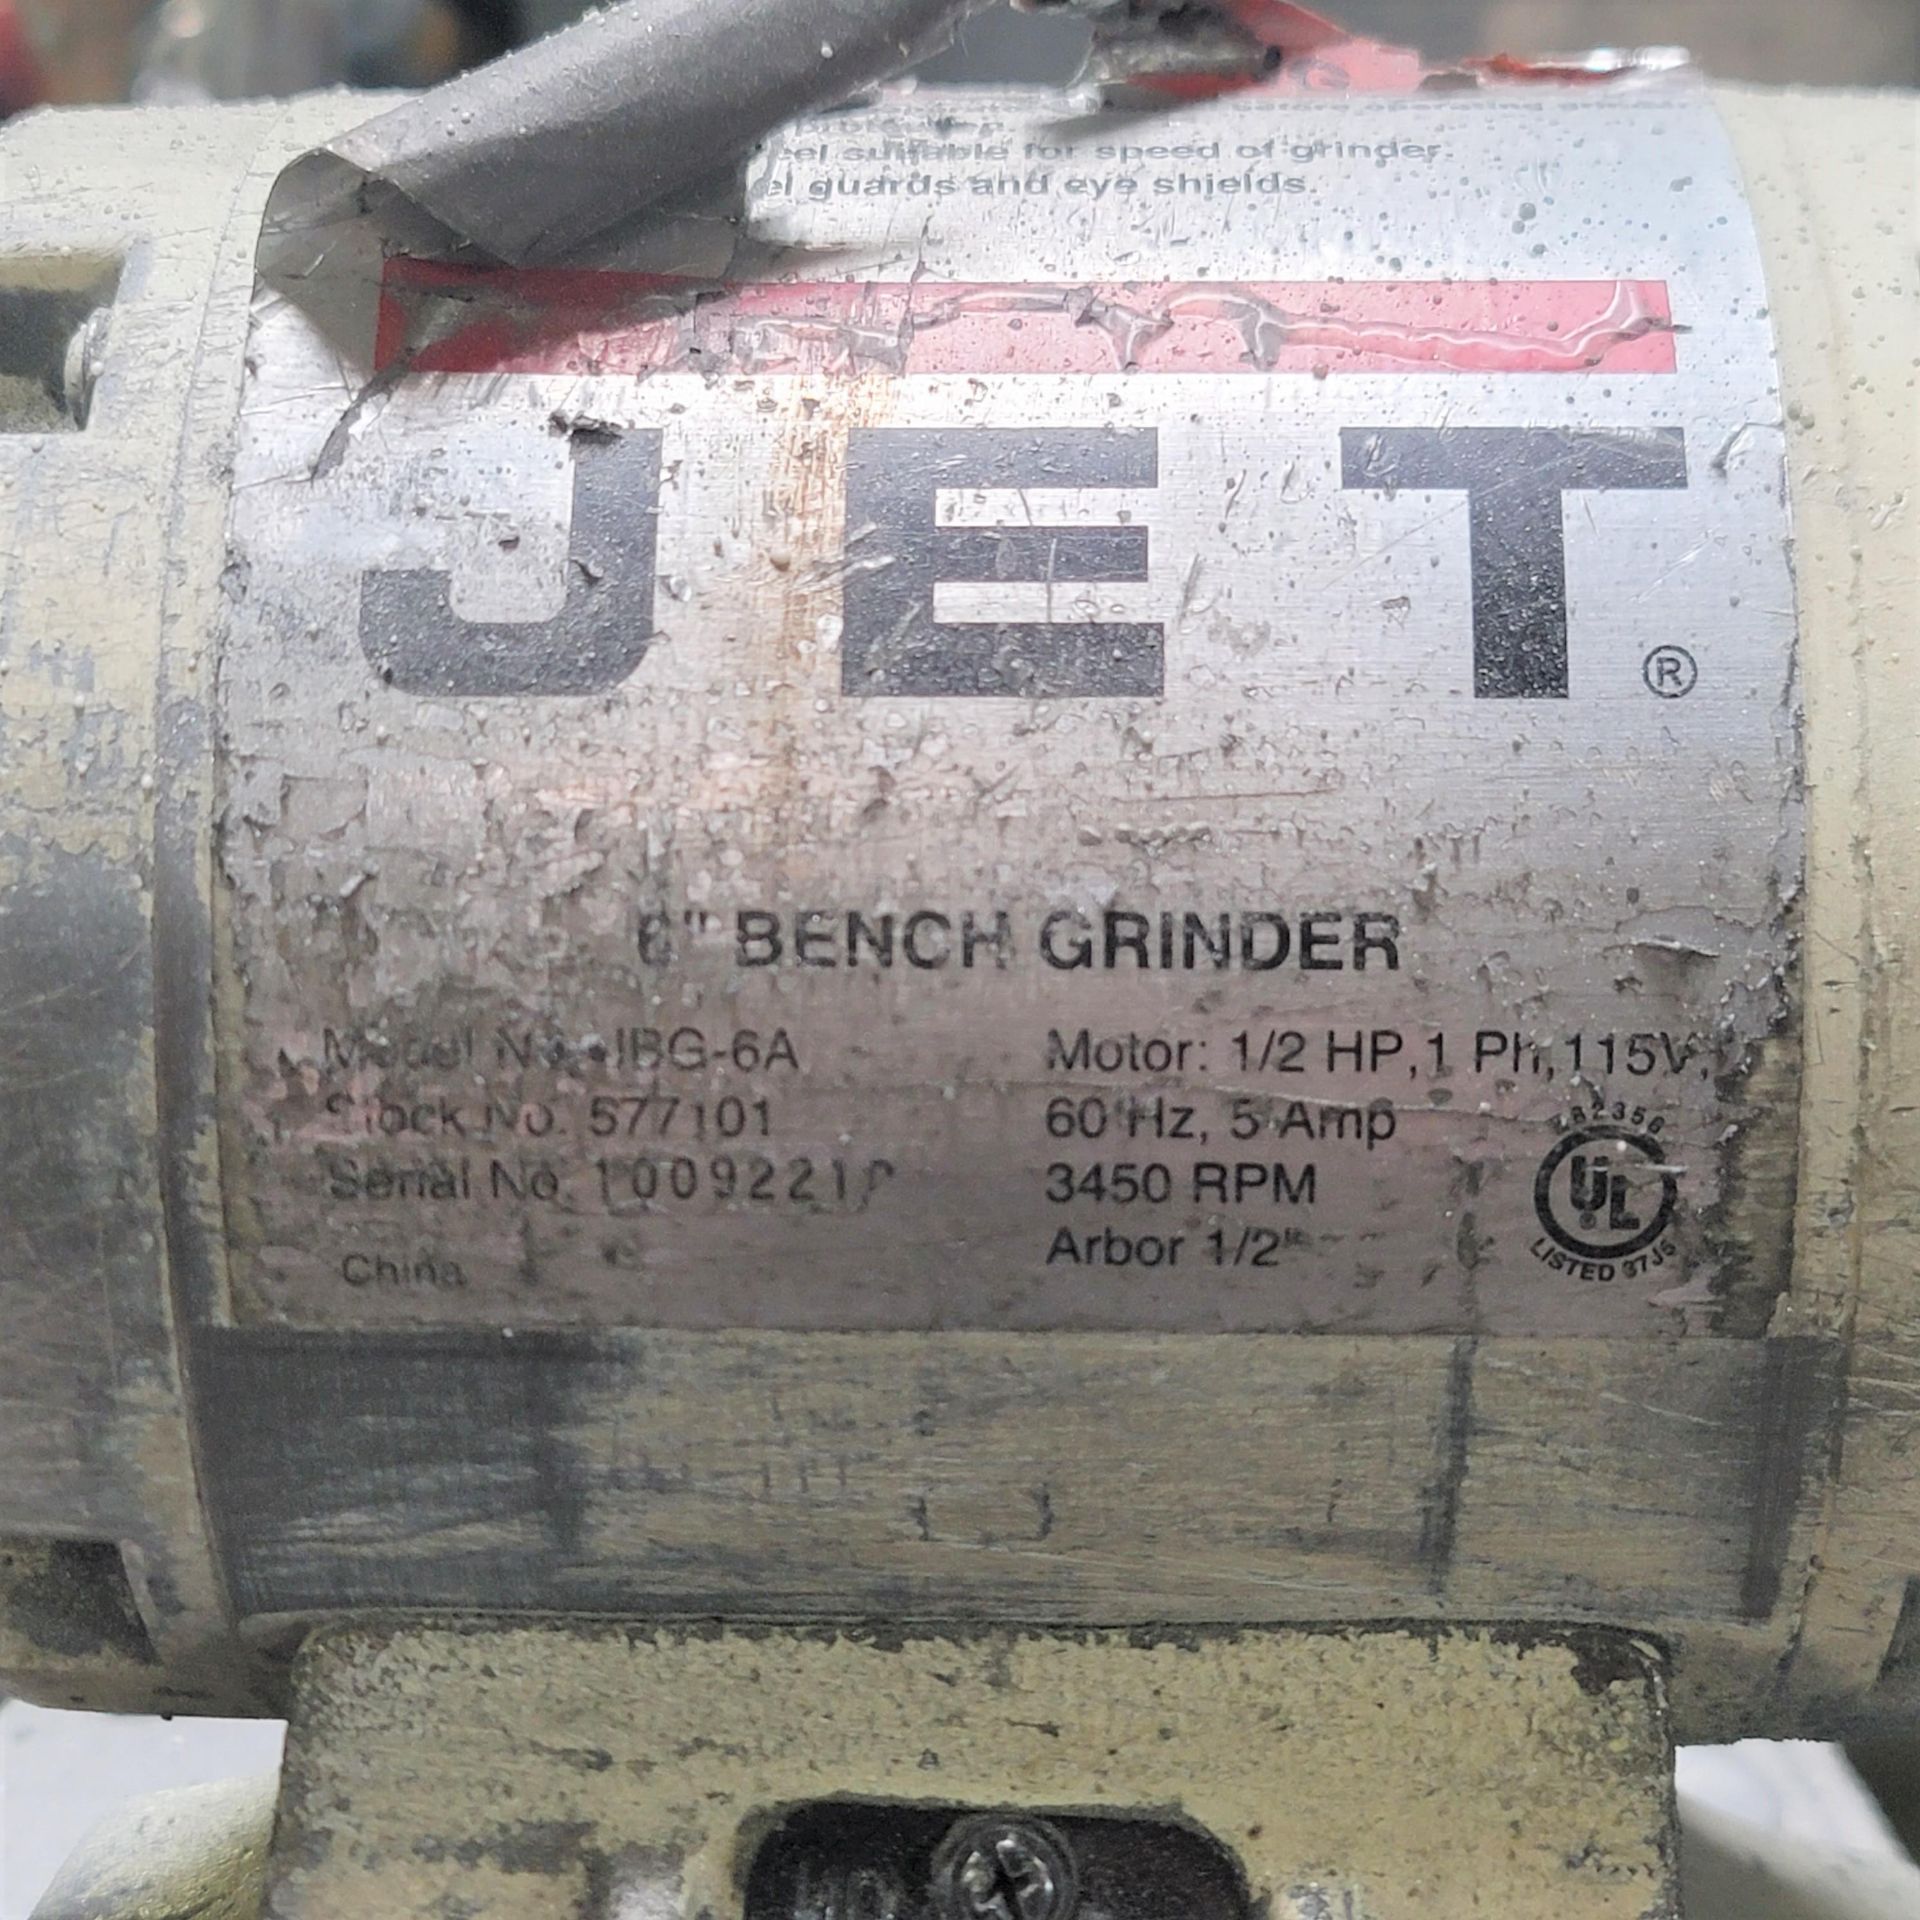 JET 6" DOUBLE END GRINDER, 1/2 HP, W/ STAND - Image 2 of 3